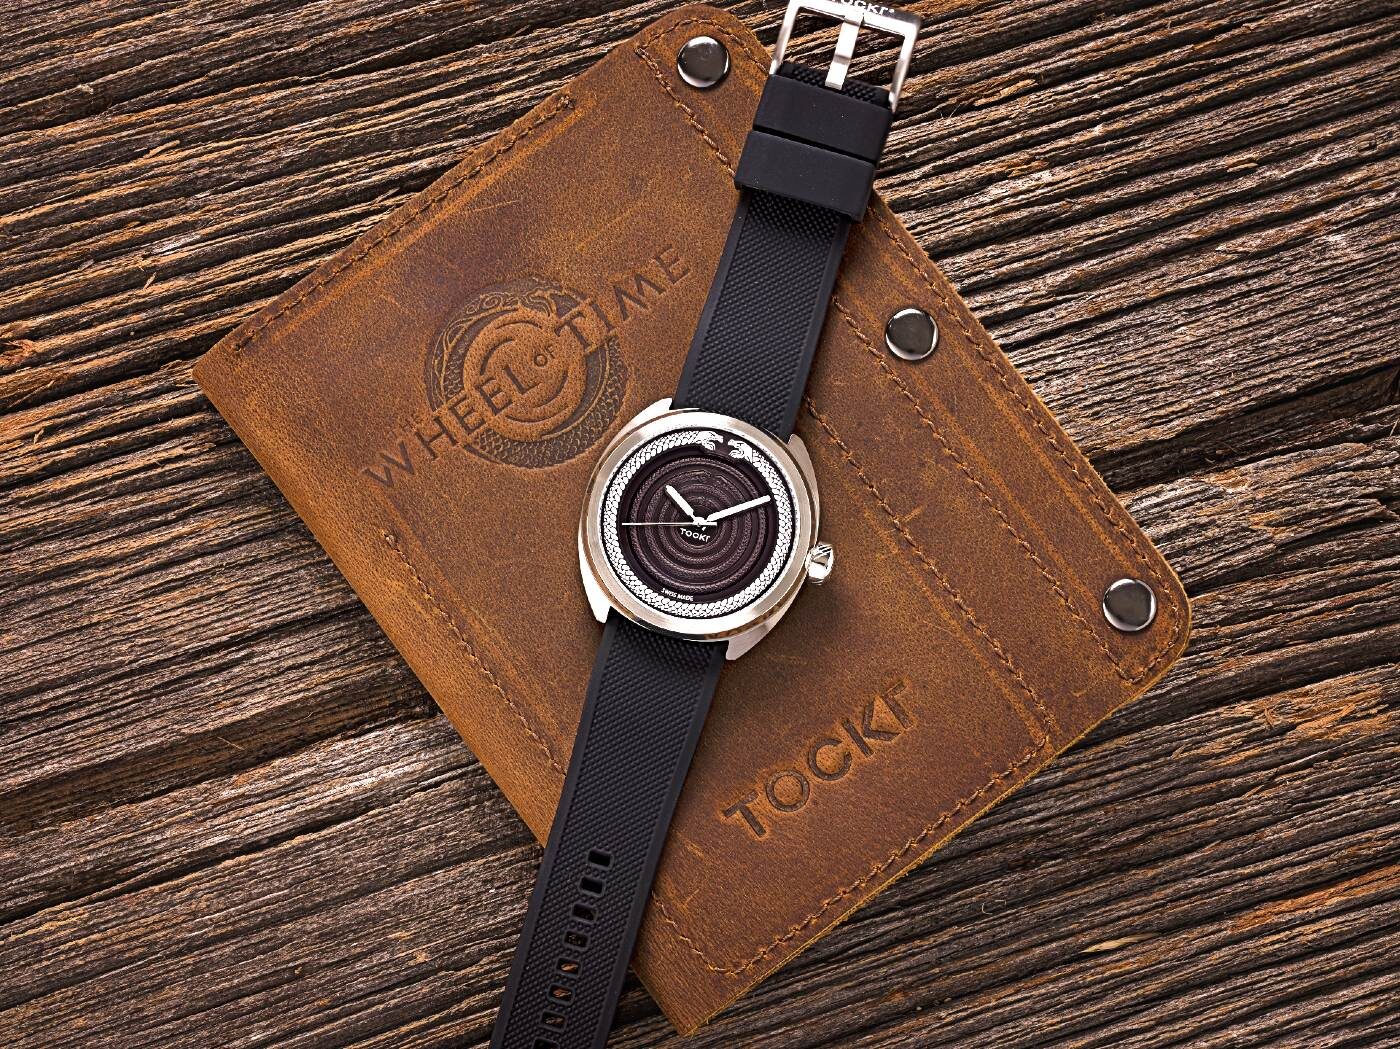 Tockr Wheel of Time watch lifestyle